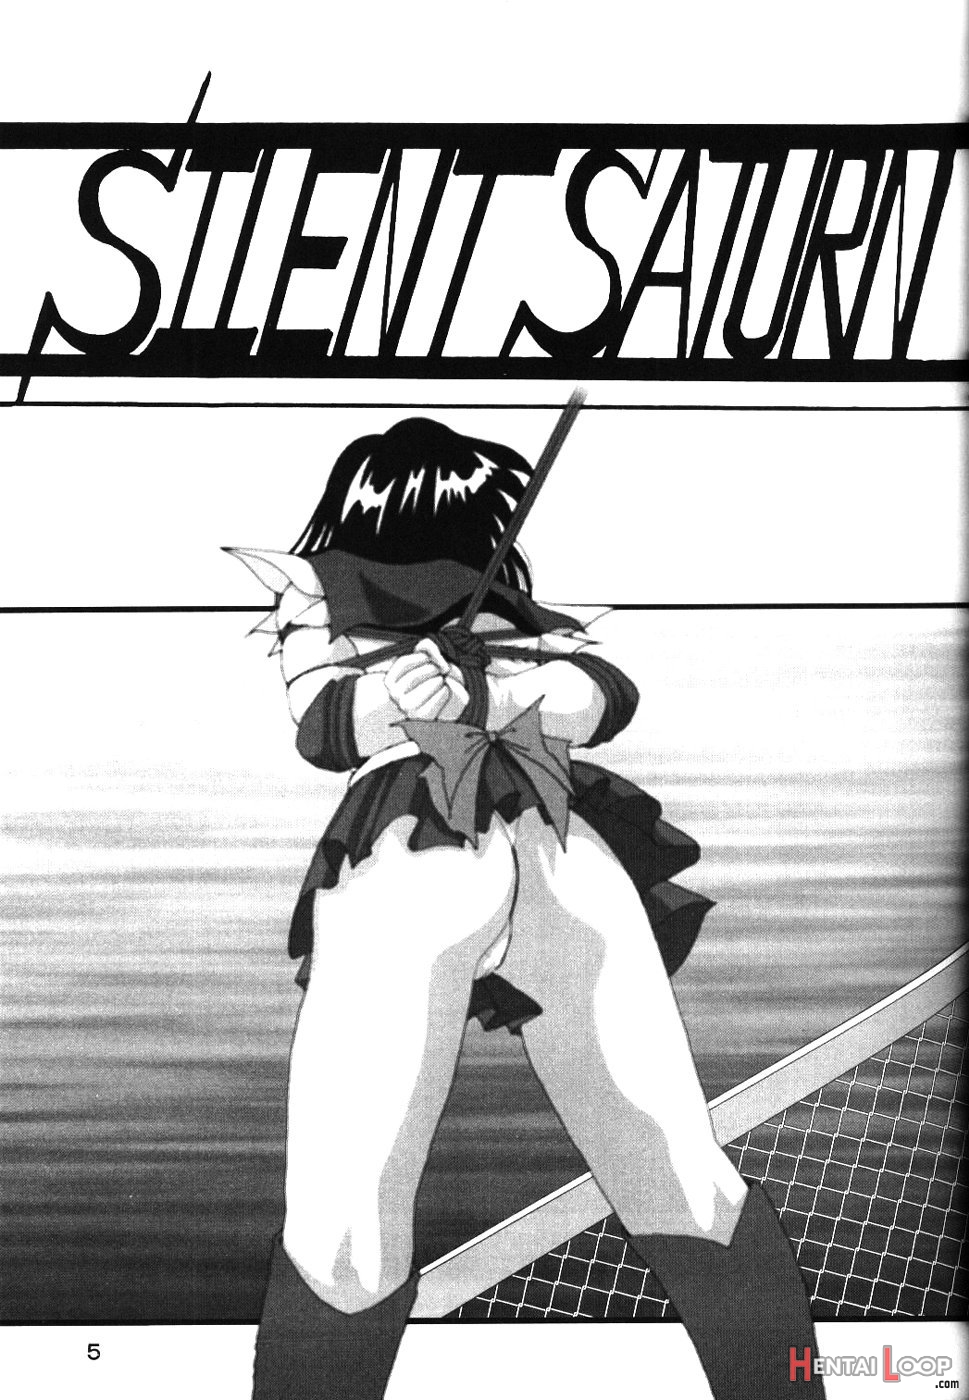 Silent Saturn Ss Vol. 7 page 4